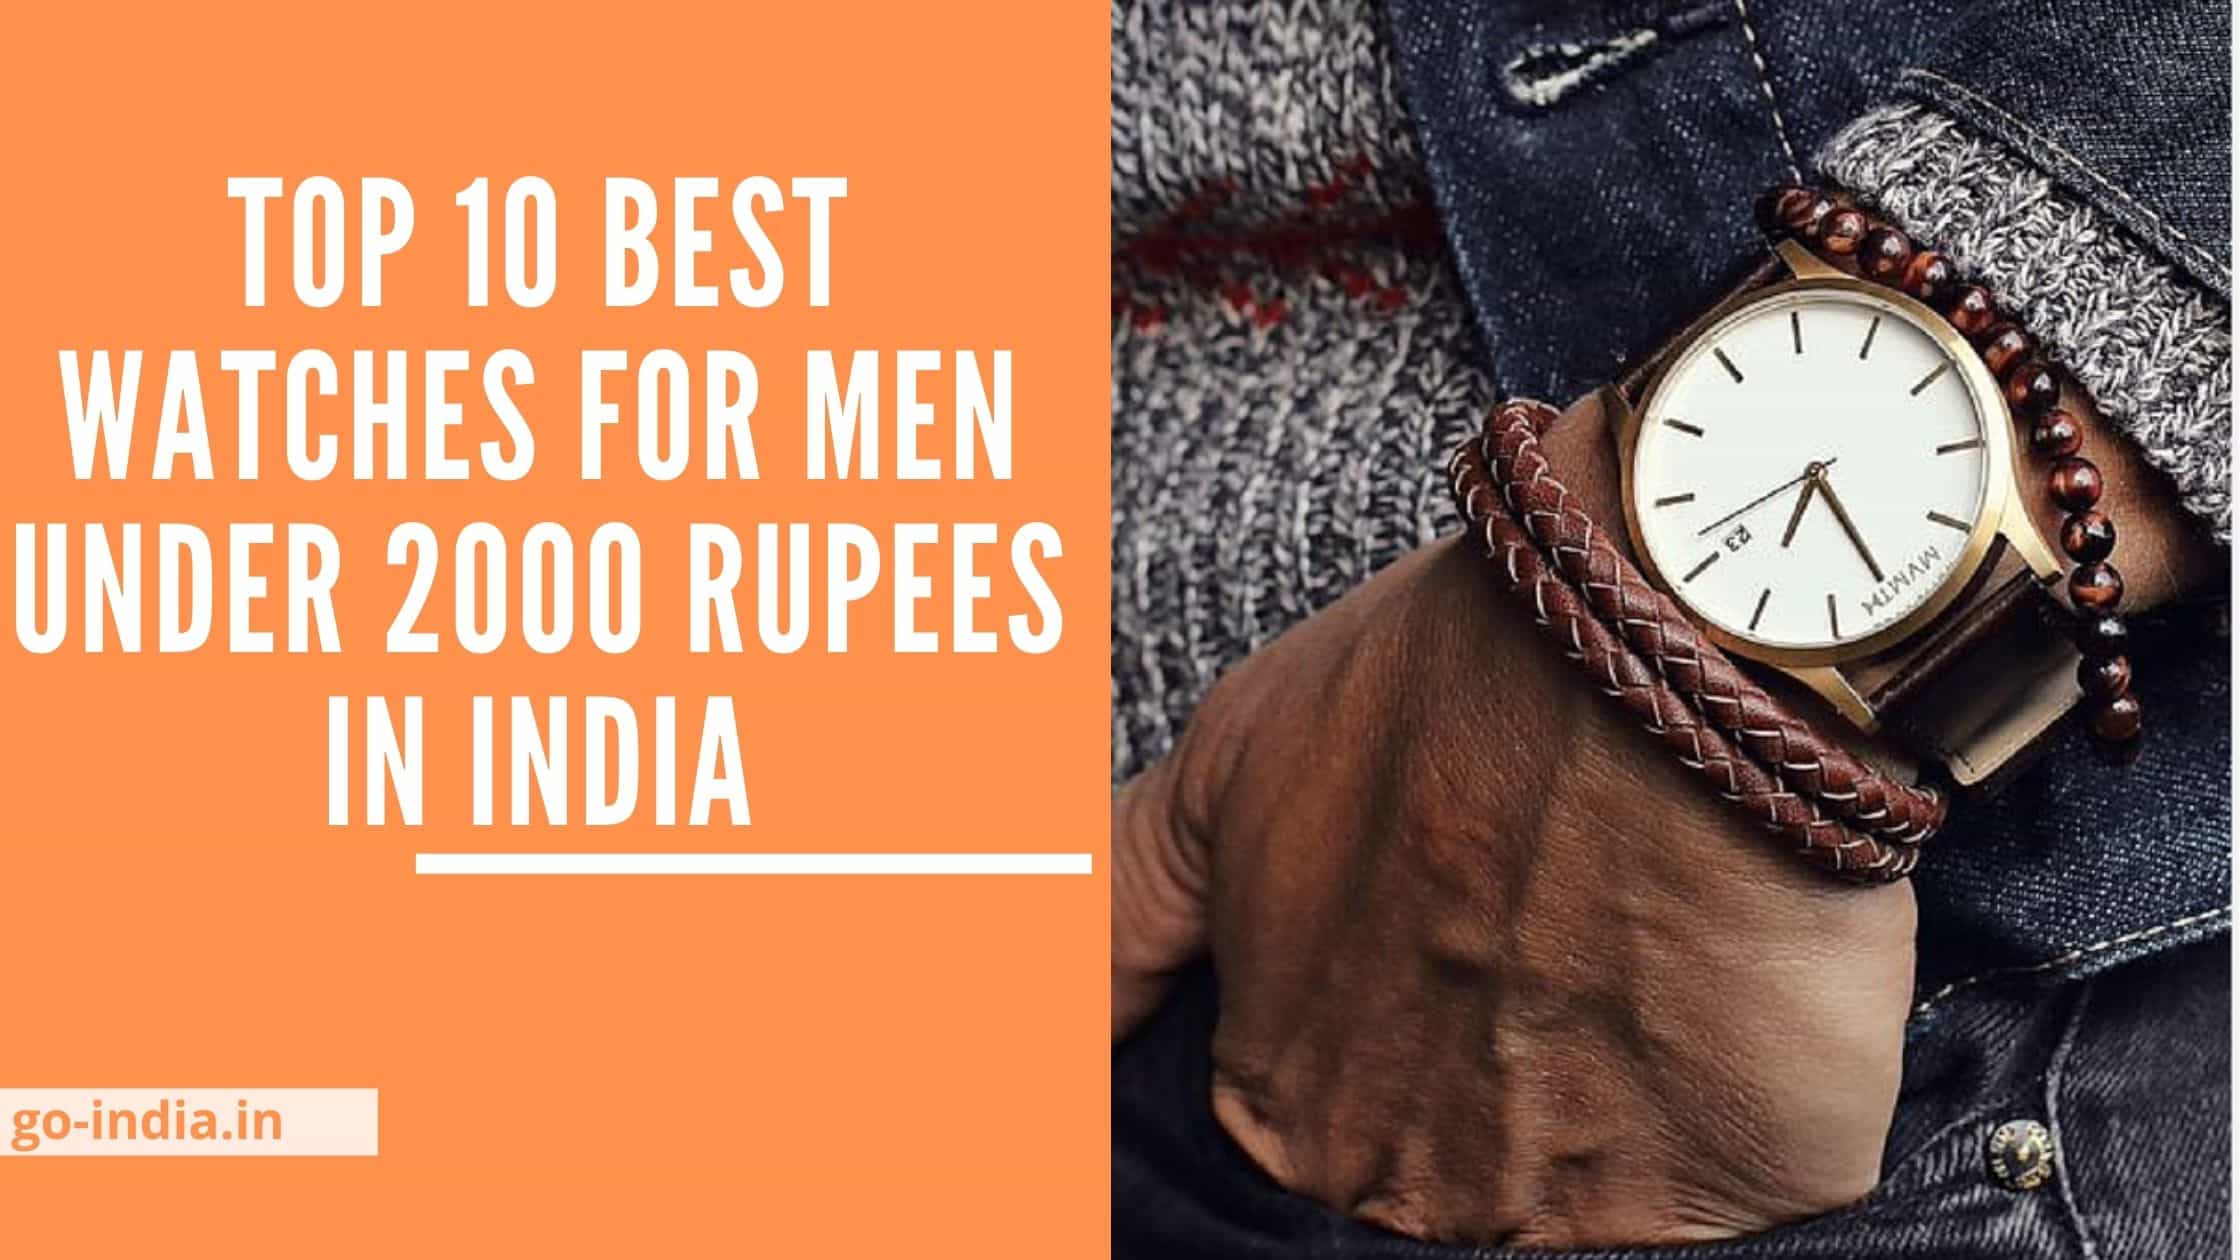 Top 10 Best Watches For Men Under 2000 Rupees in India 2022